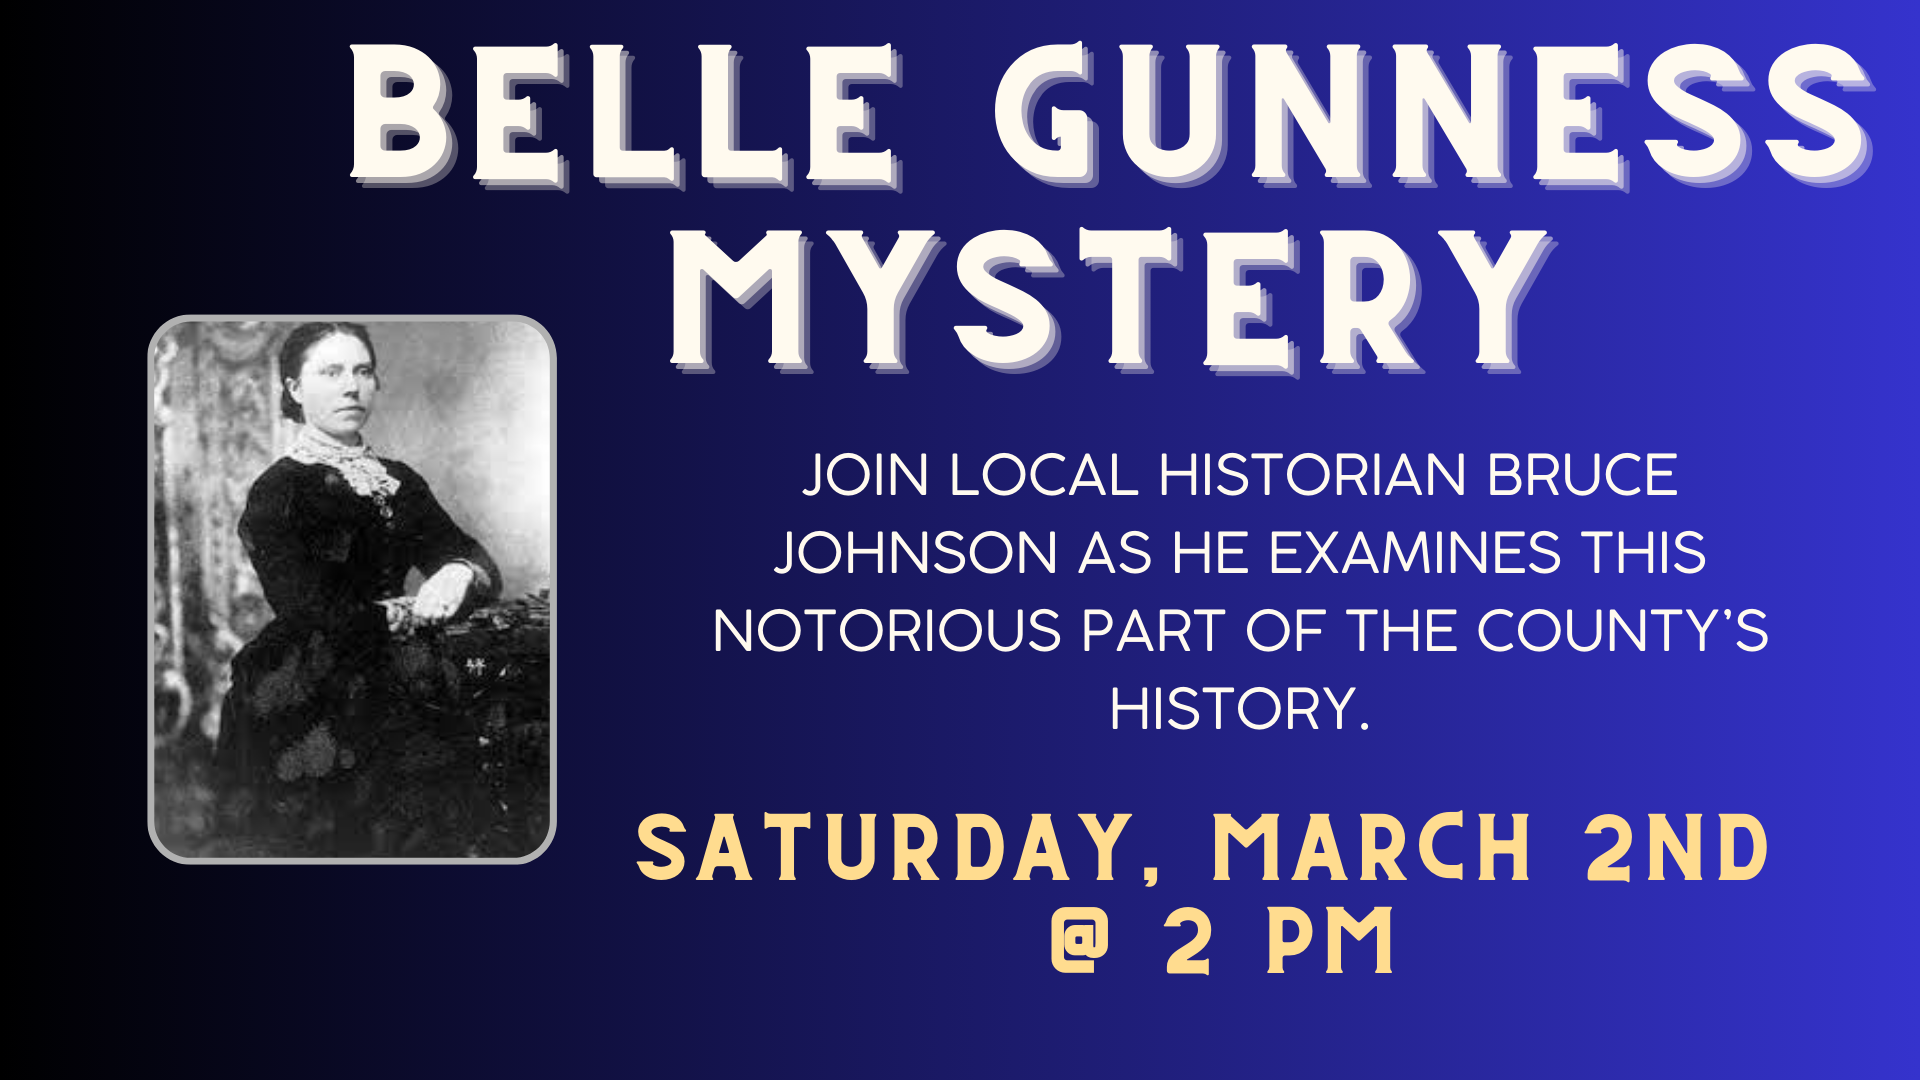 Belle Gunness Mystery, Saturday, March 2 at 2:00 pm